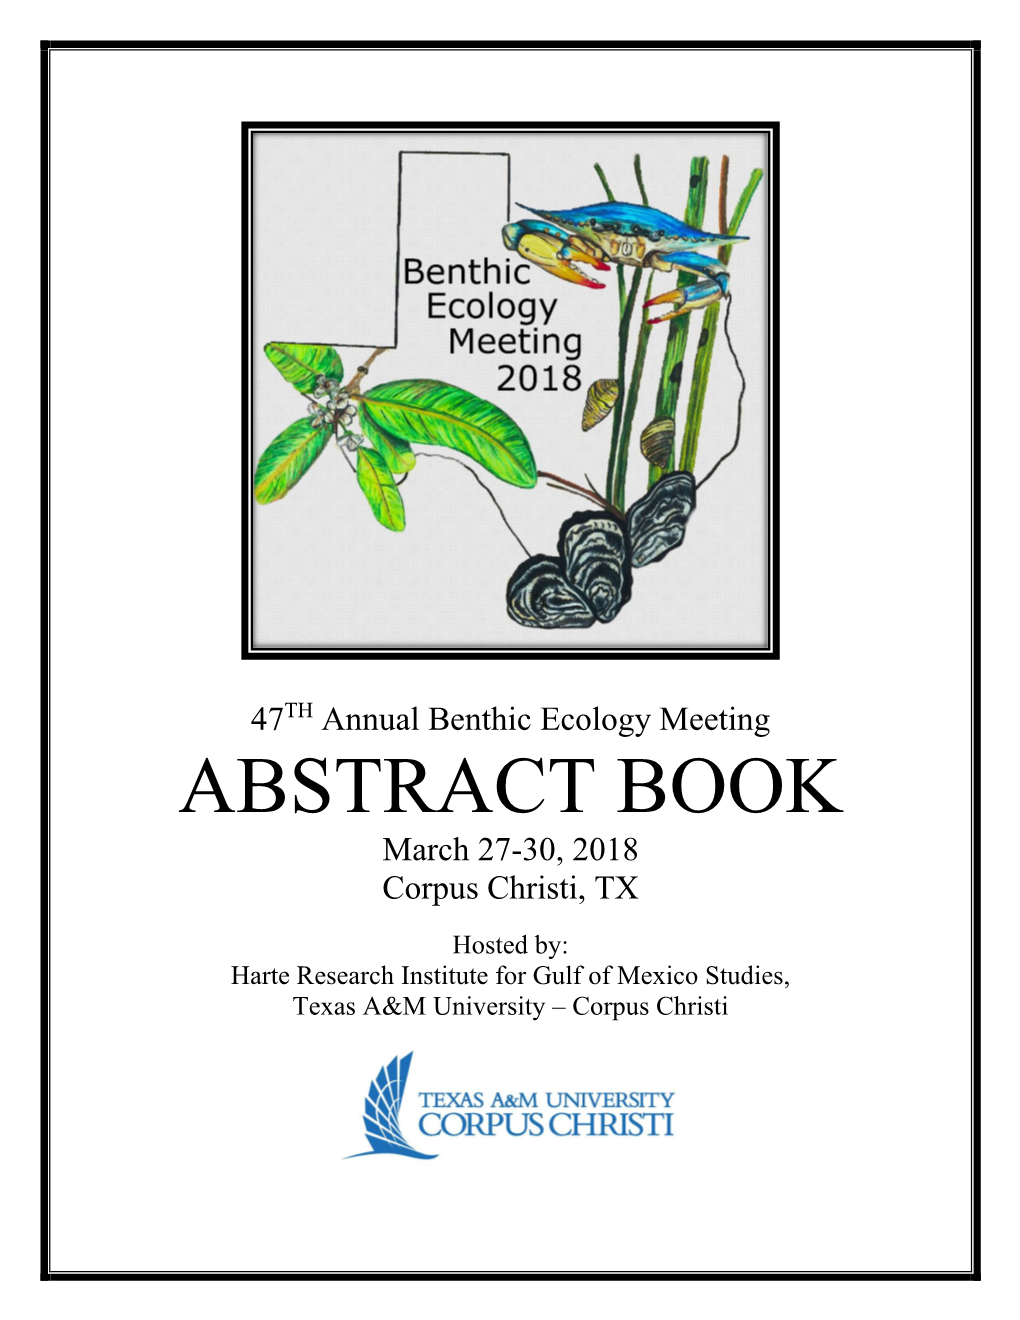 ABSTRACT BOOK March 27-30, 2018 Corpus Christi, TX